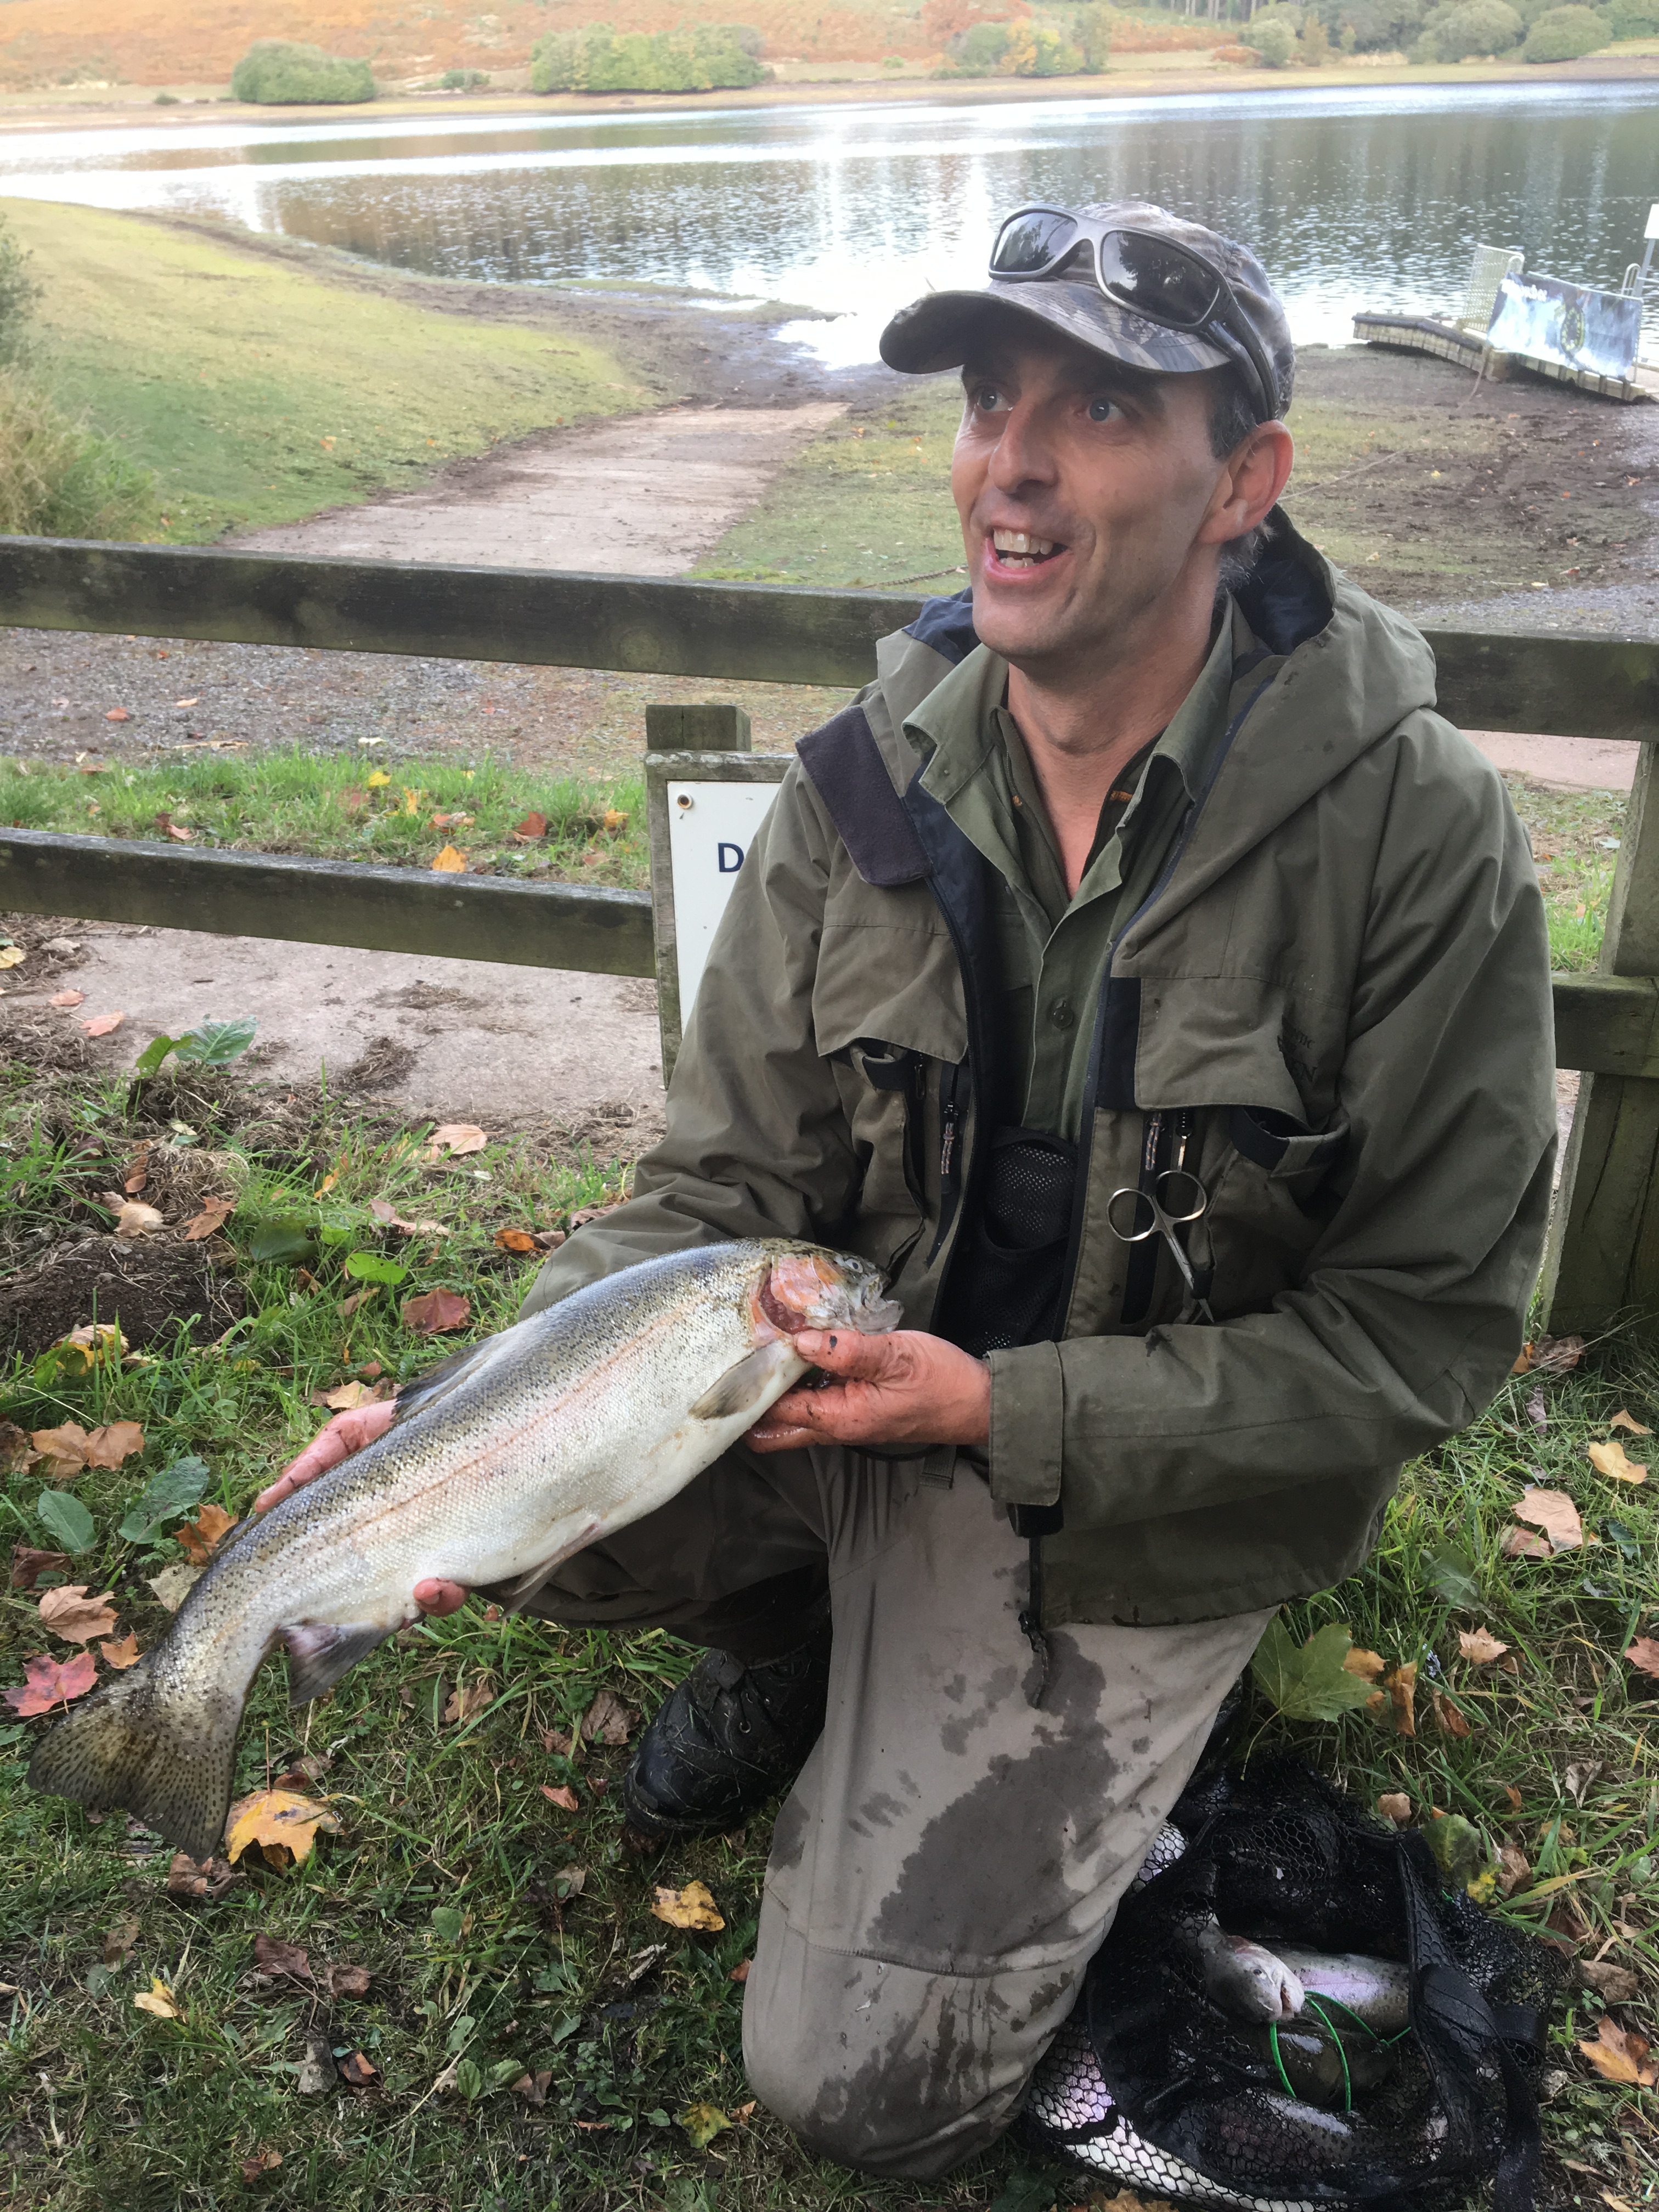 PERKS WINS £1000 AT BEST OF THE BEST TROUT FISHING FINAL! - North